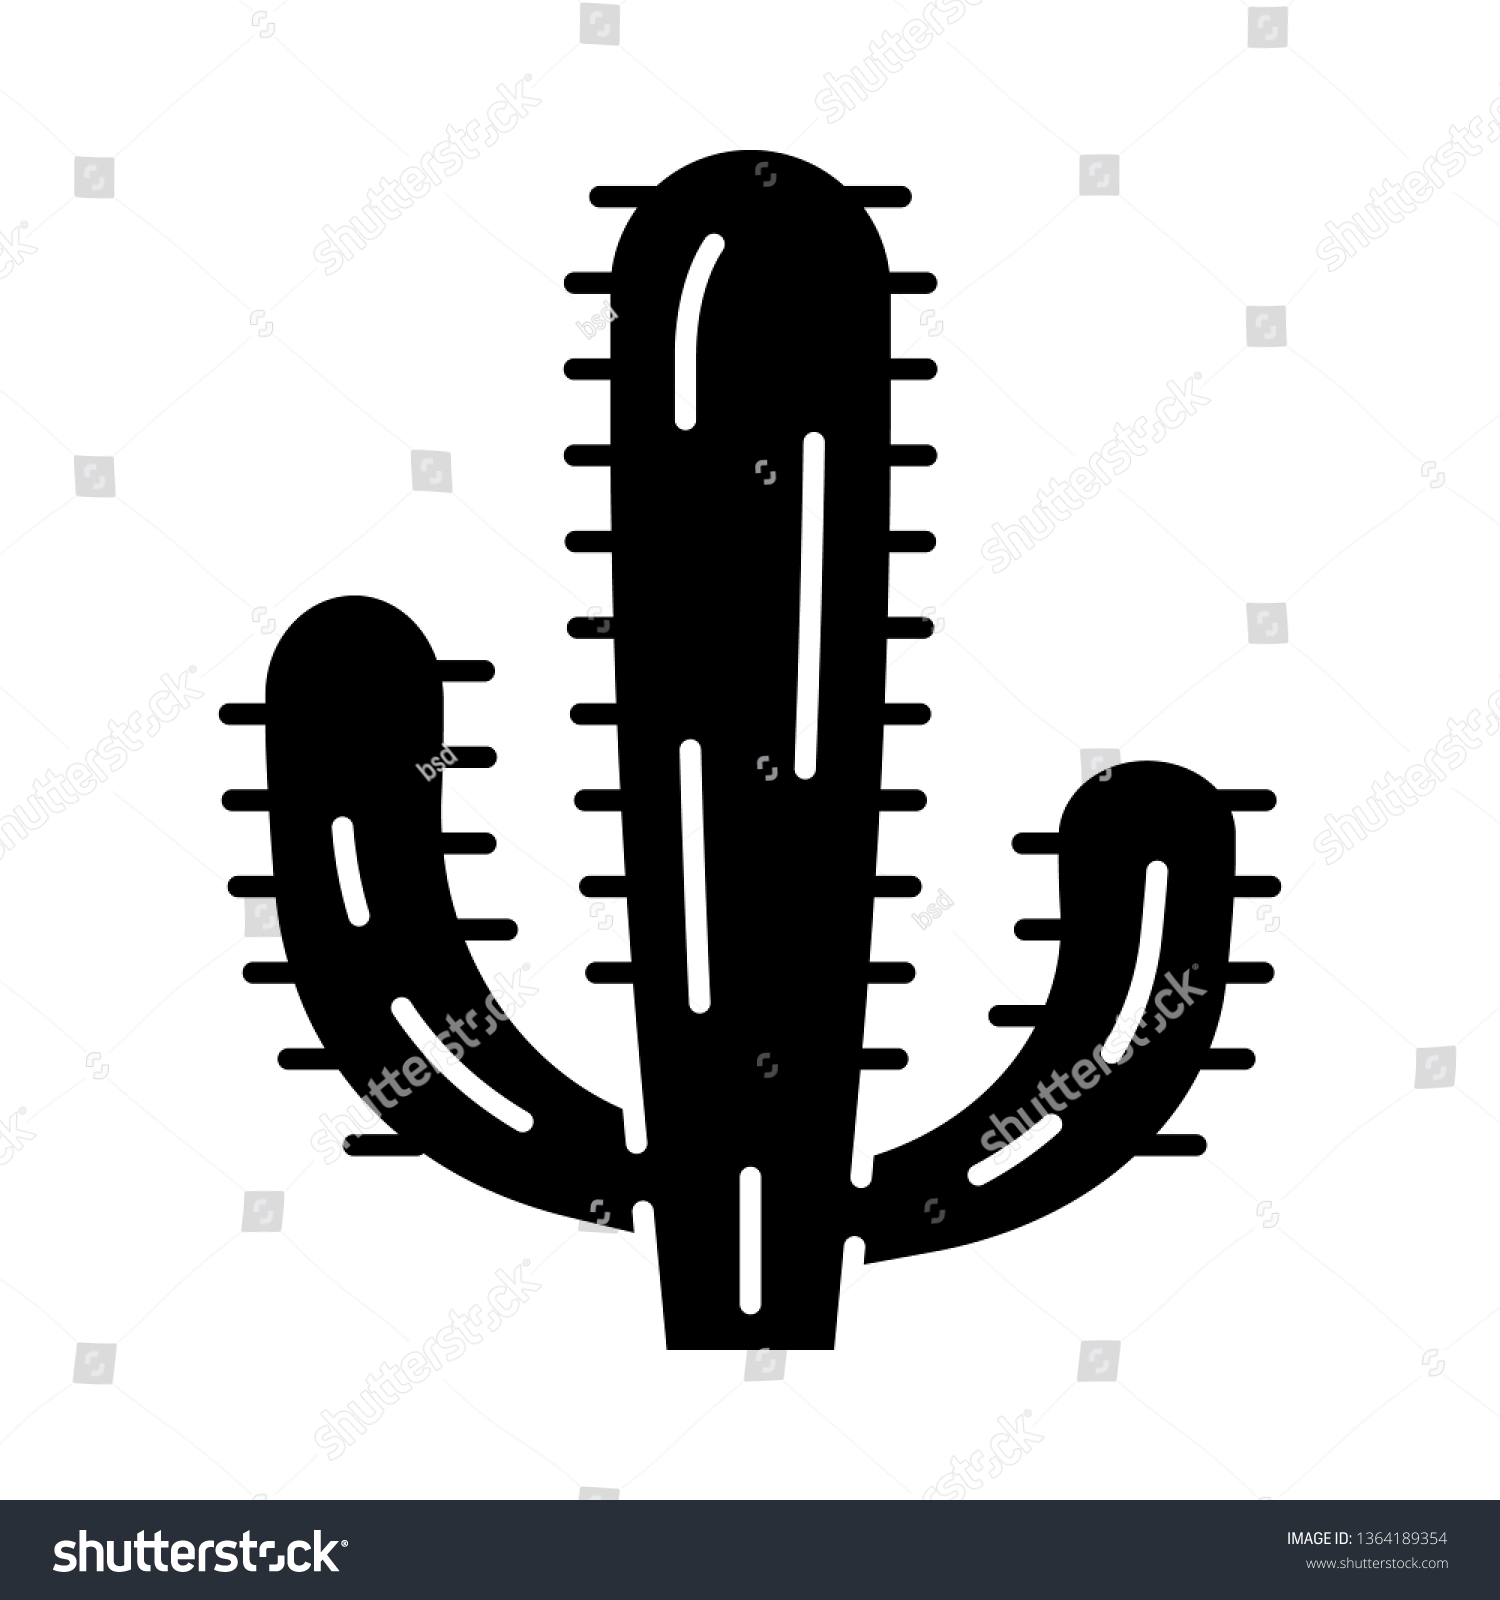 SVG of Mexican giant cactus glyph icon. Cardon. Elephant cactus. Mexican flora. Tallest cacti. Silhouette symbol. Negative space. Vector isolated illustration svg